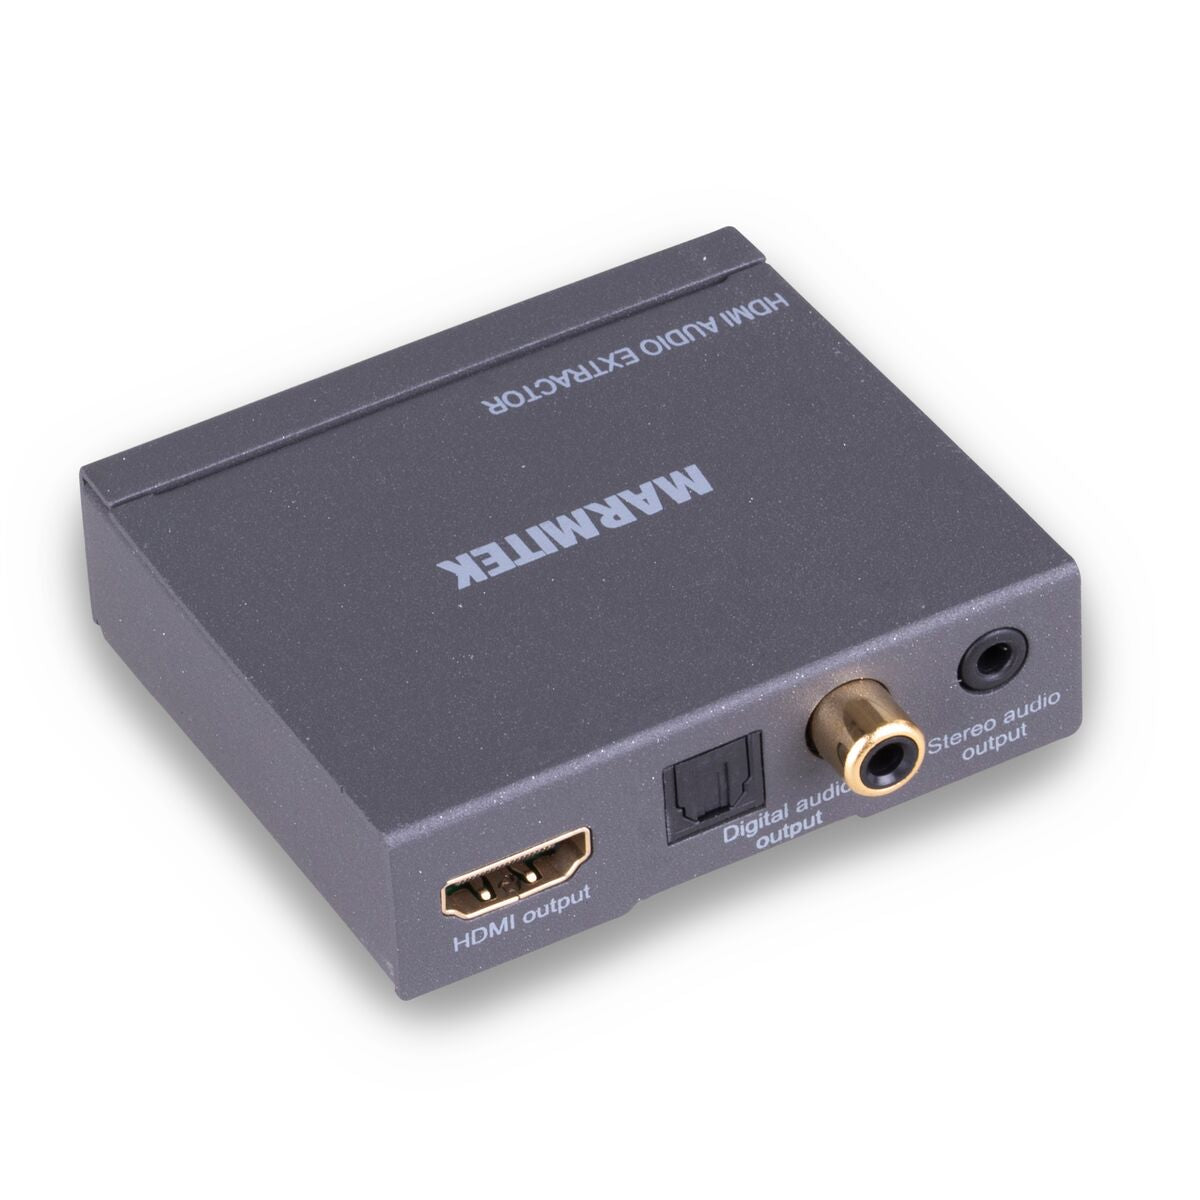 Connect AE14 - Extracteur audio HDMI 4K - 4K30 - ARC - 10.2 Gbps